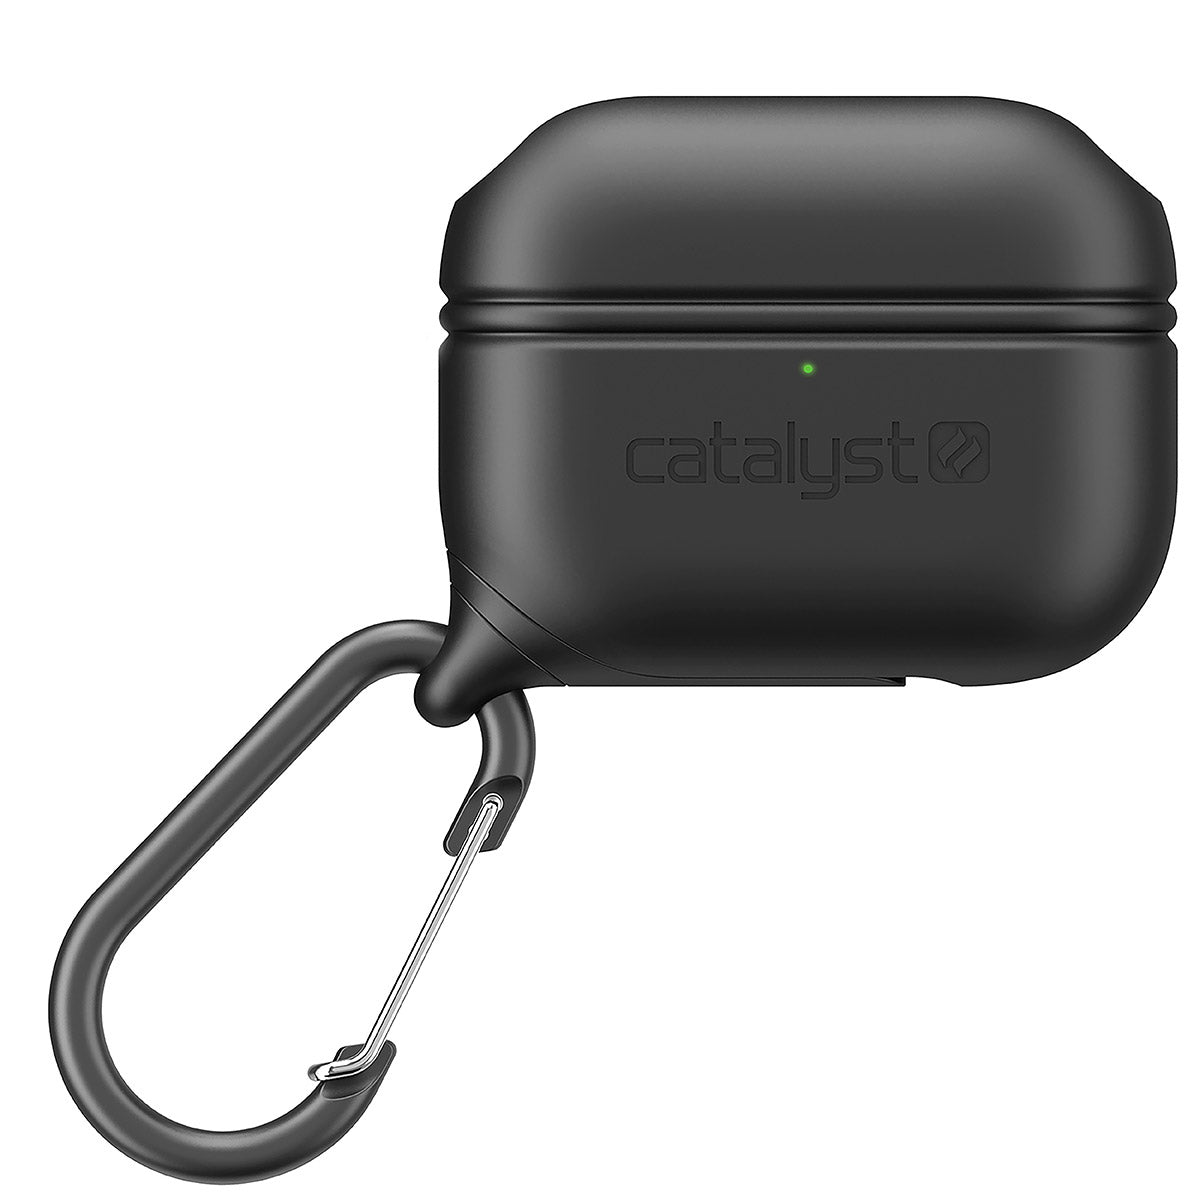 CATAPLAPDPROBLK | catalyst airpods pro gen 2 1 waterproof case carabiner special edition black front view